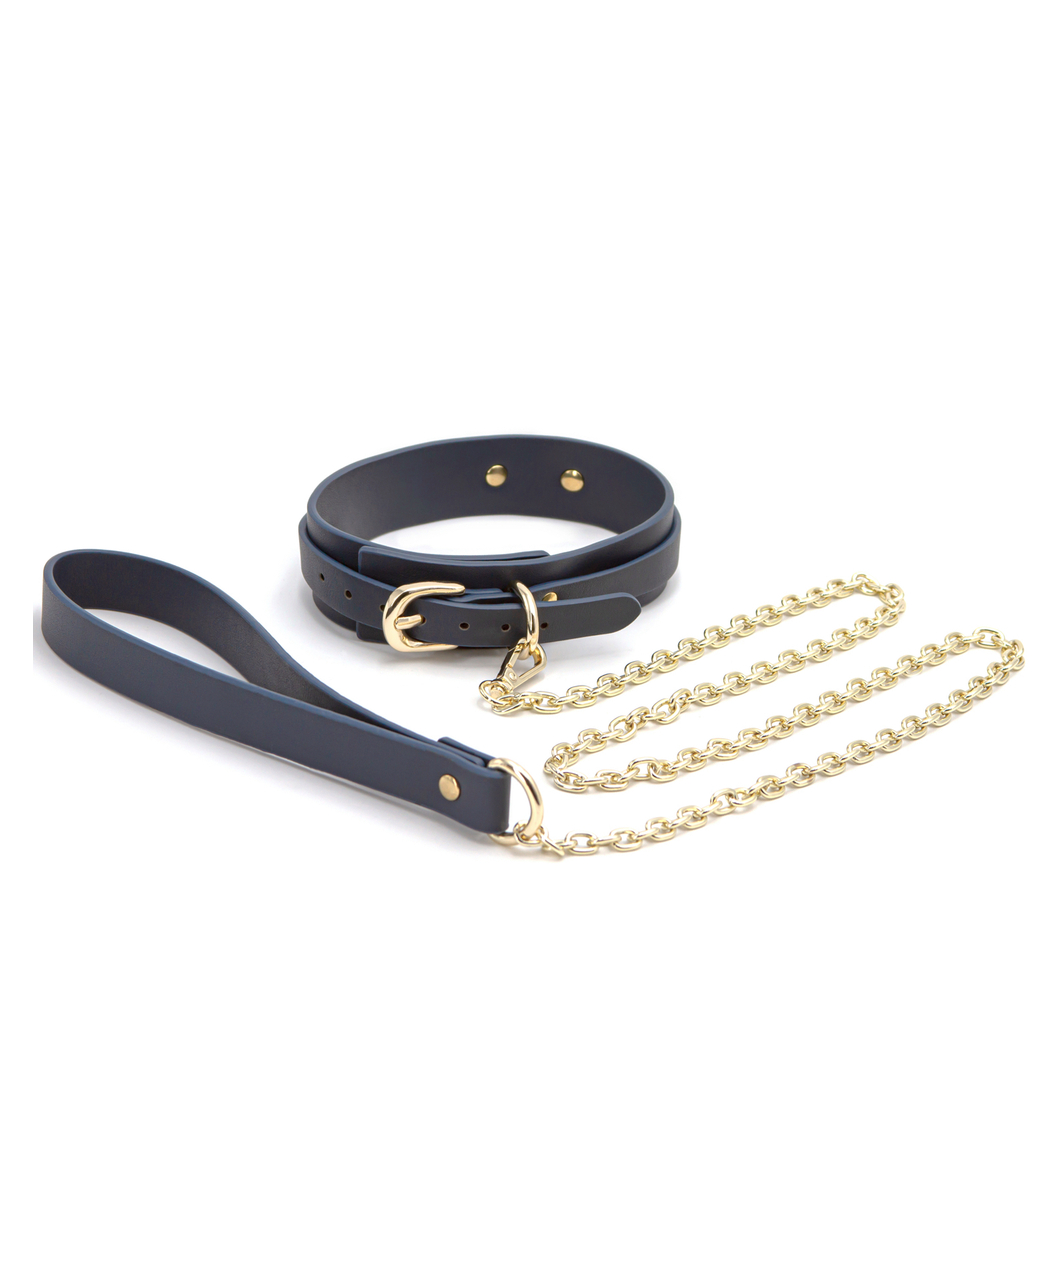 NS Novelties navy blue faux leather collar with leash